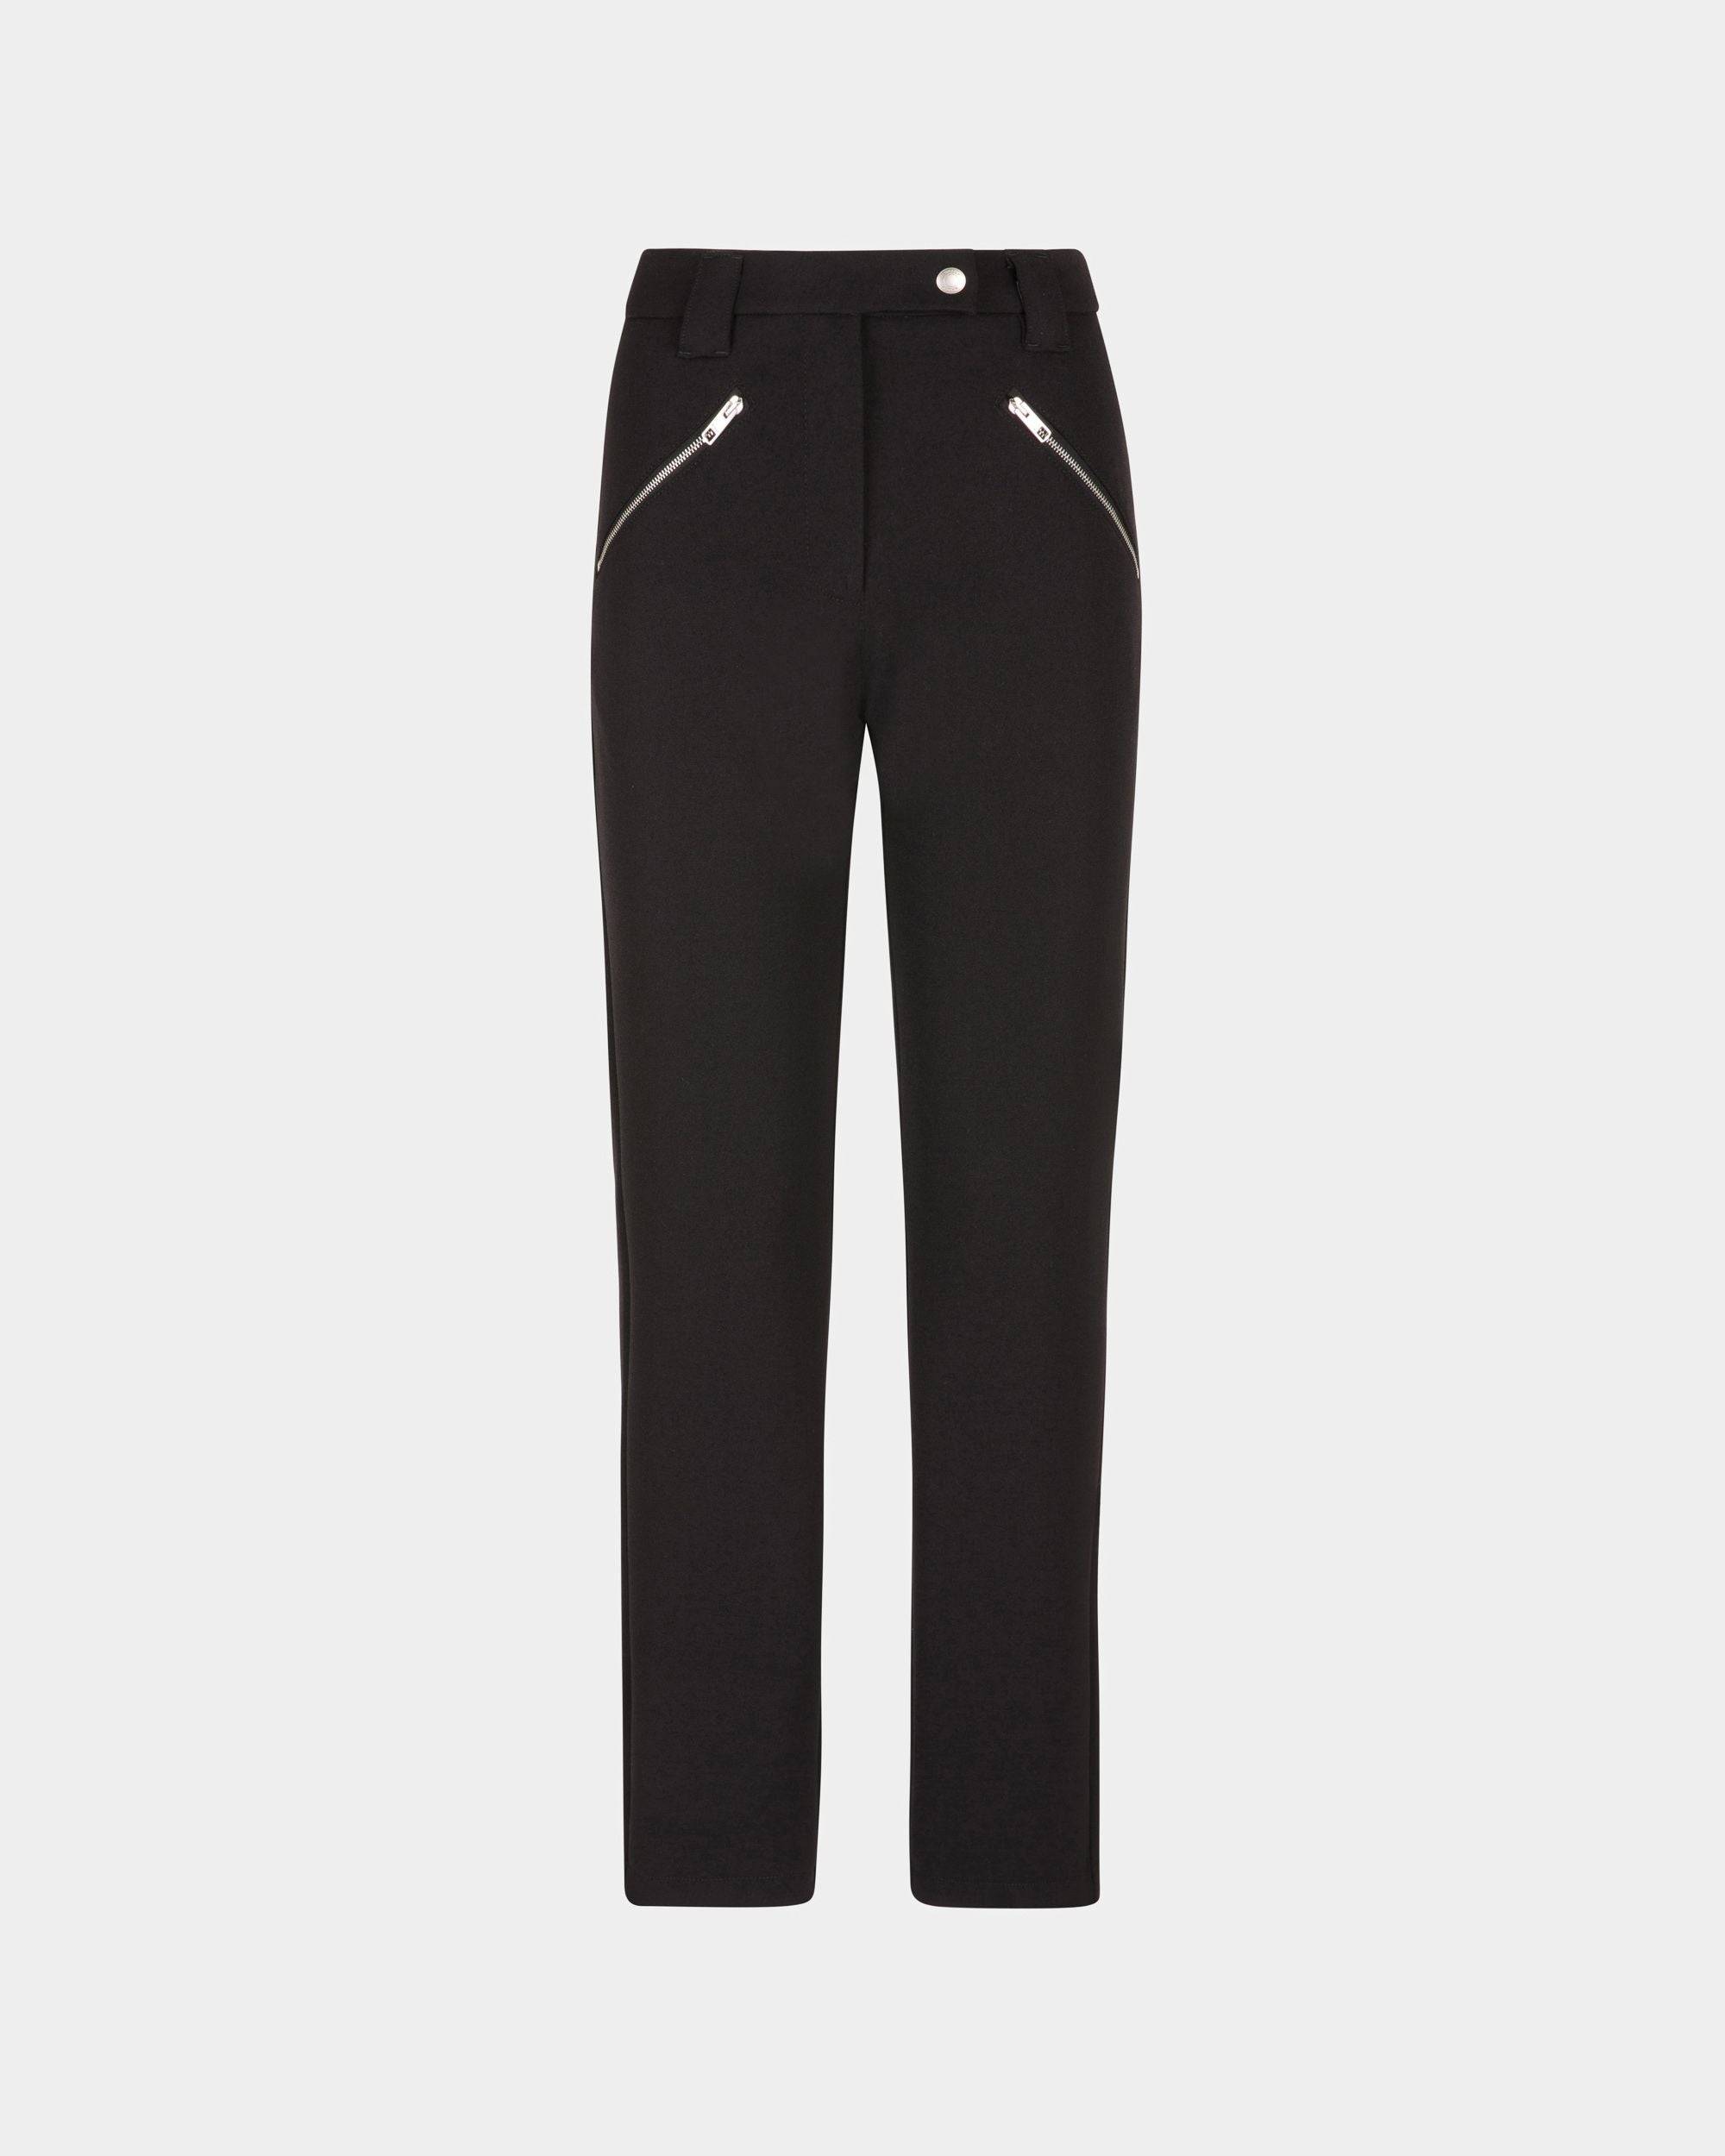 Women's Stretch Pants In Black | Bally | Still Life Front